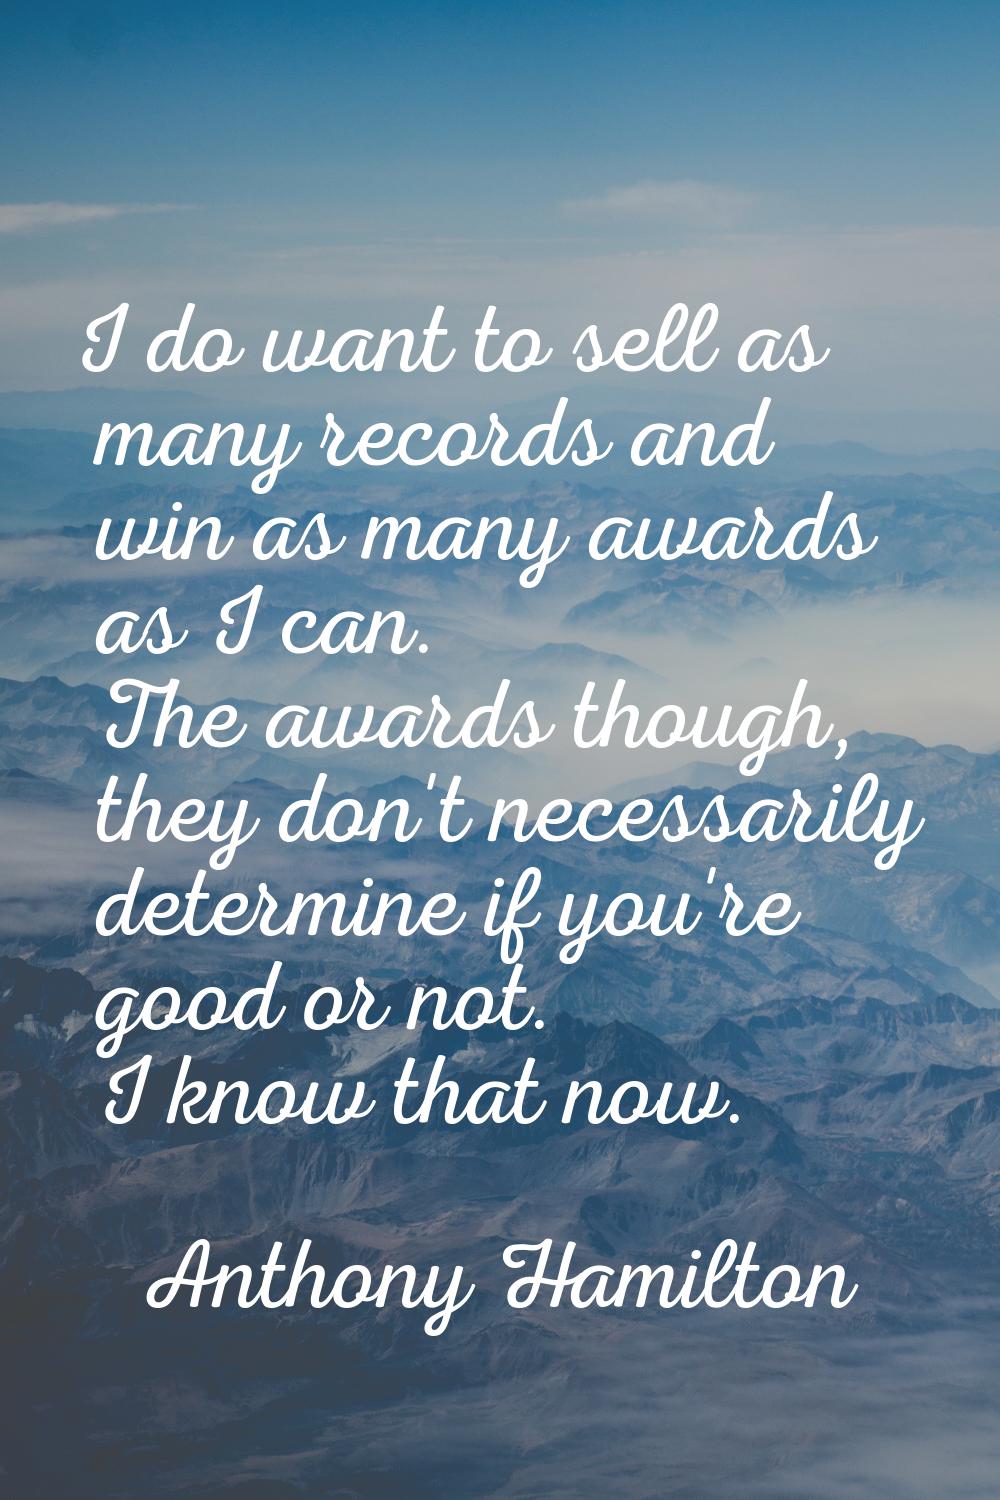 I do want to sell as many records and win as many awards as I can. The awards though, they don't ne